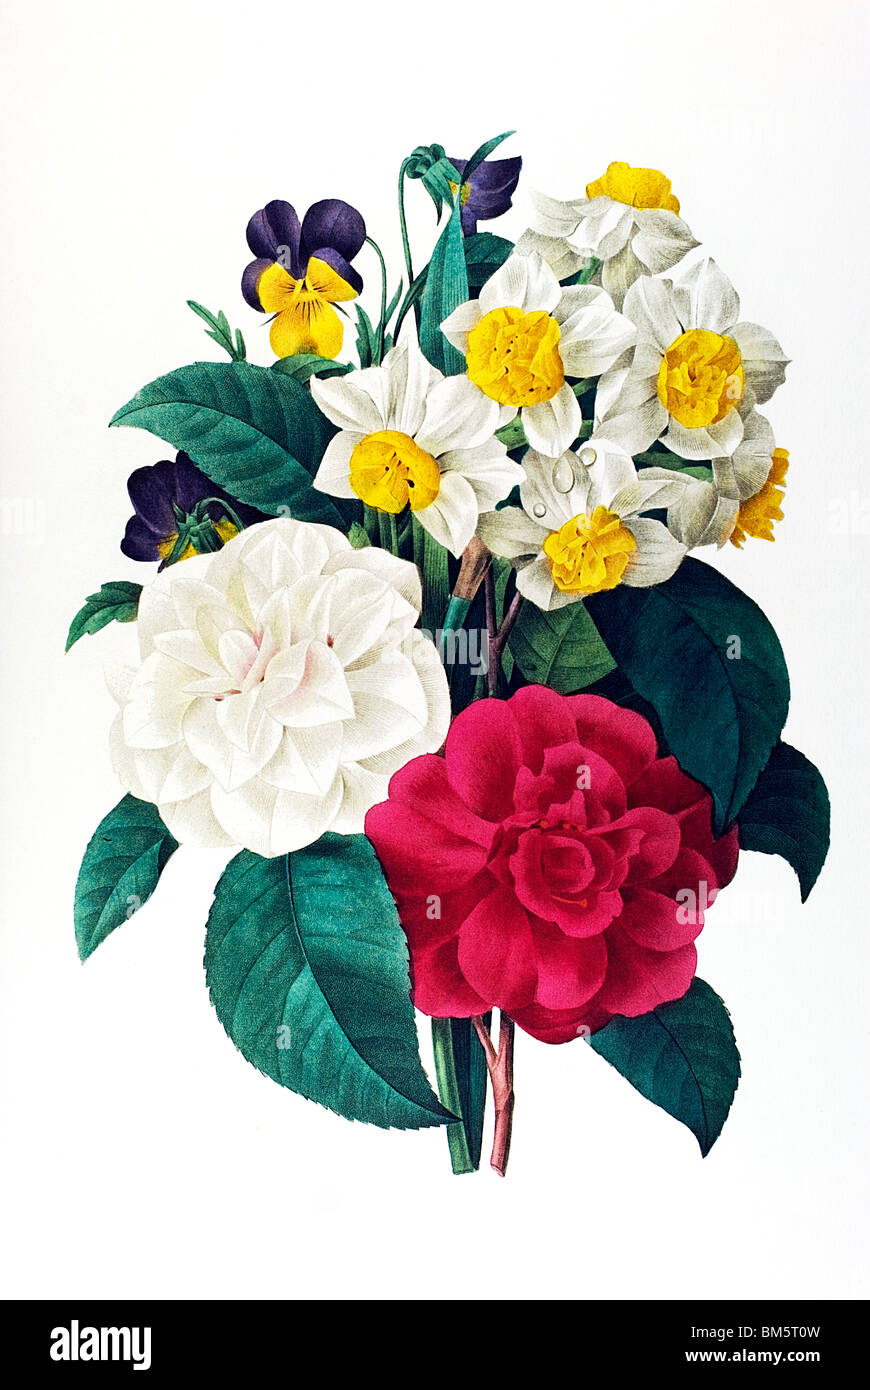 Camellias, daffodils and pansies Stock Photo